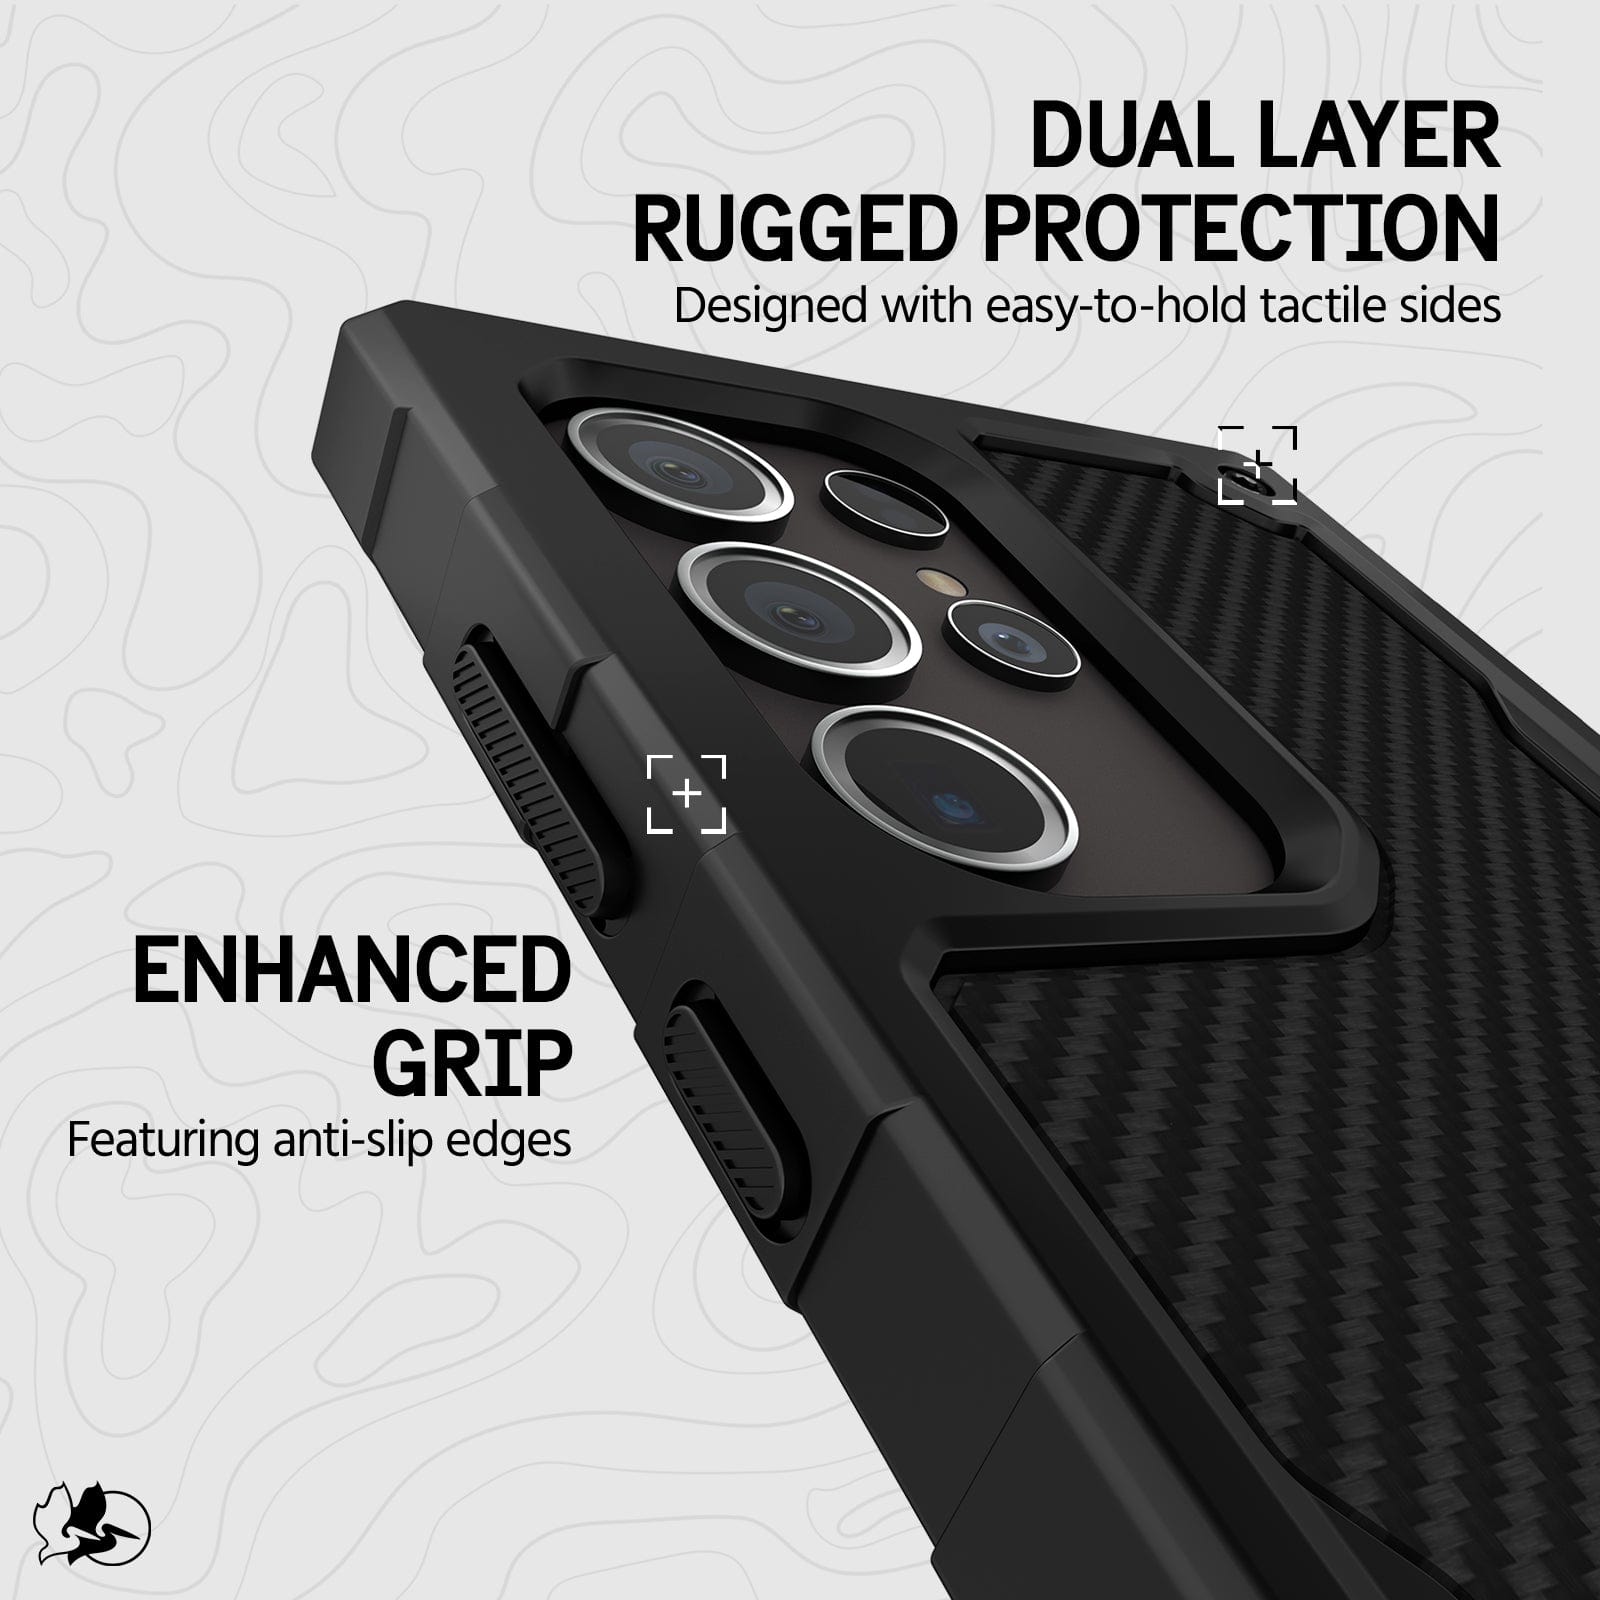 DUAL LAYER RUGGED PROTECTION DESIGNED WITH EASY-TO-HOLD TACTILE SIDES. ENHANCED GRIP FEATURING ANTI-SLIP EDGES